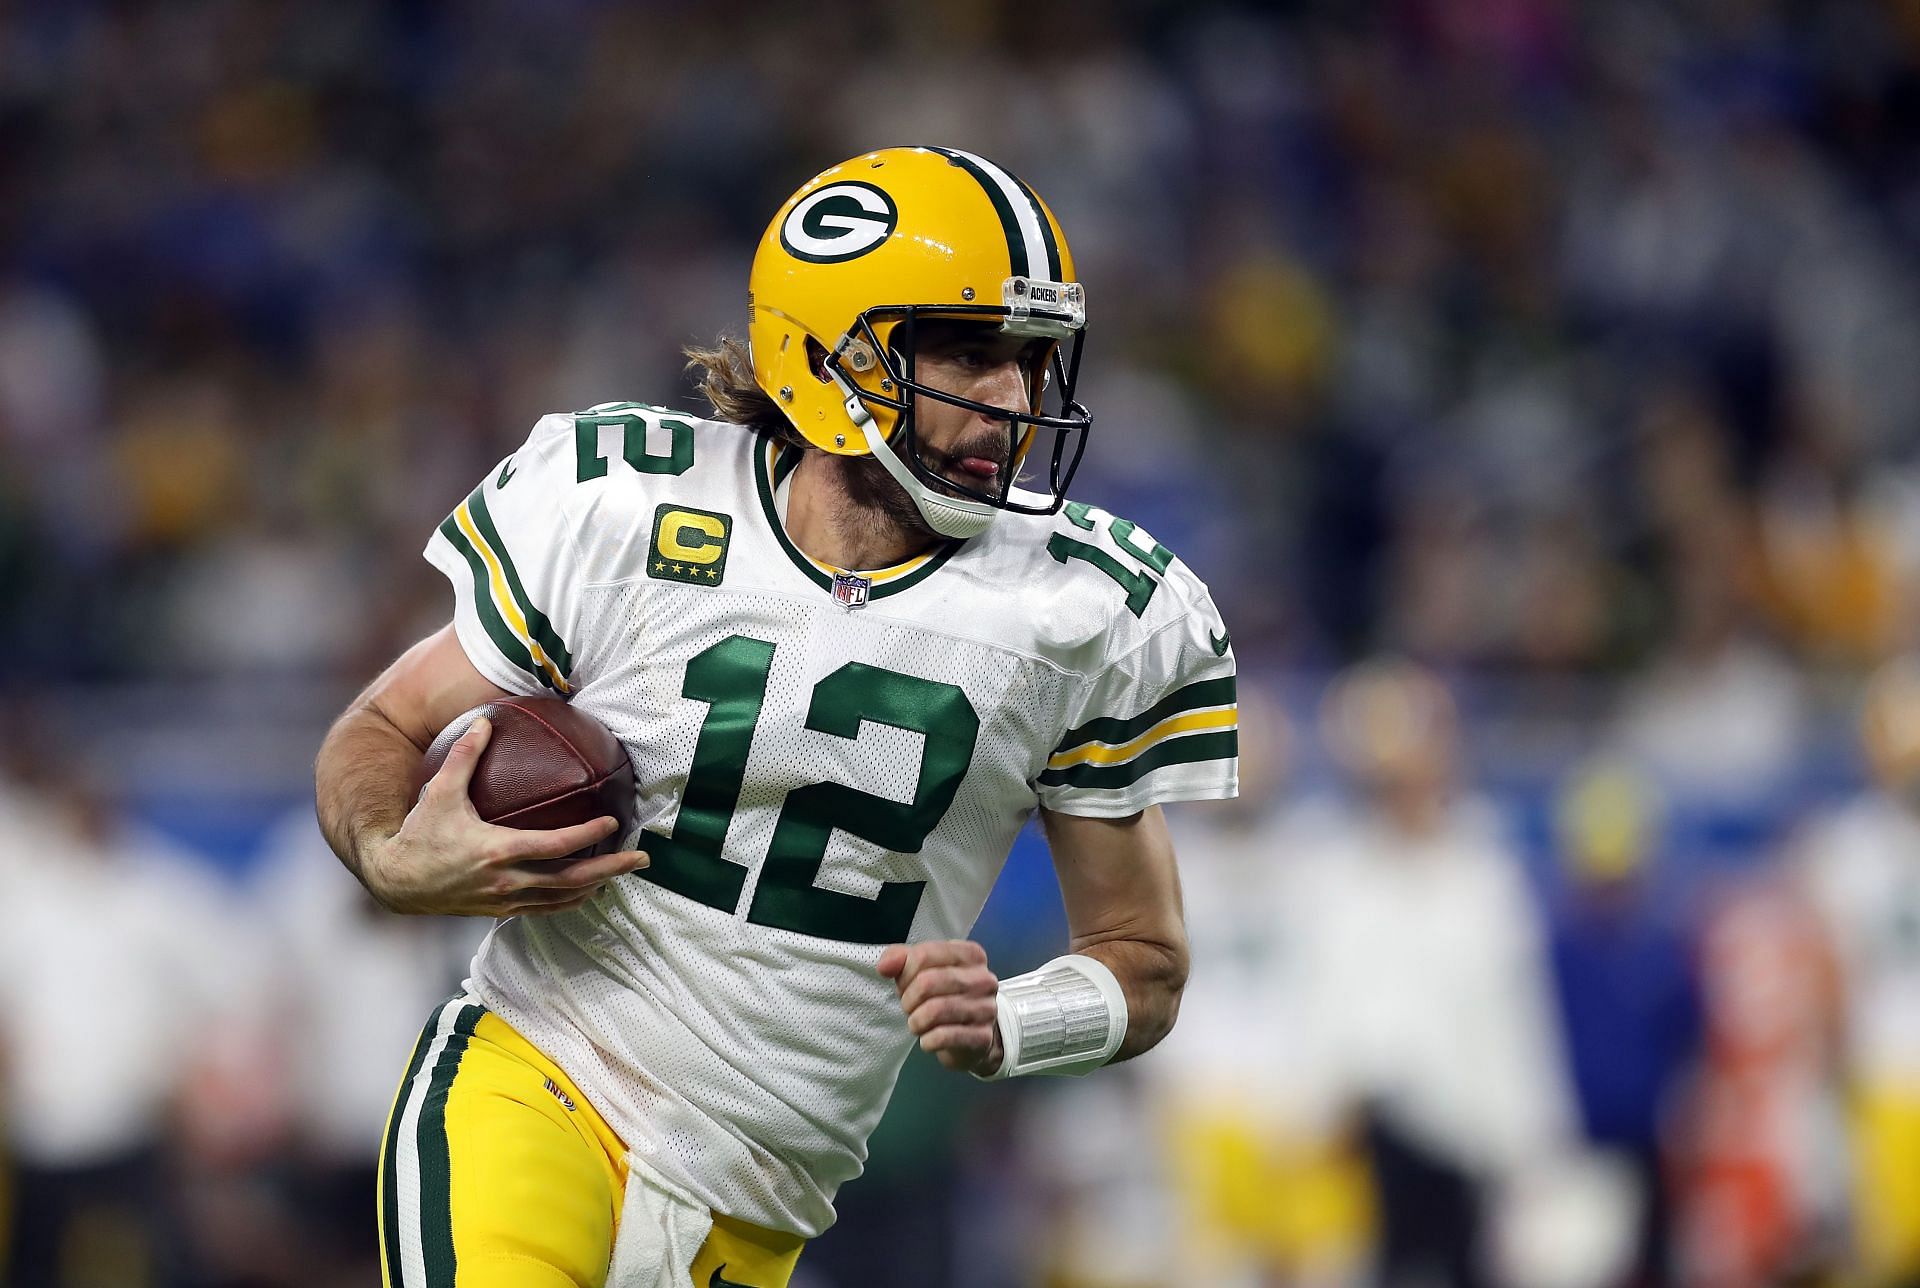 The Green Bay Packers have home field advantage for the playoffs